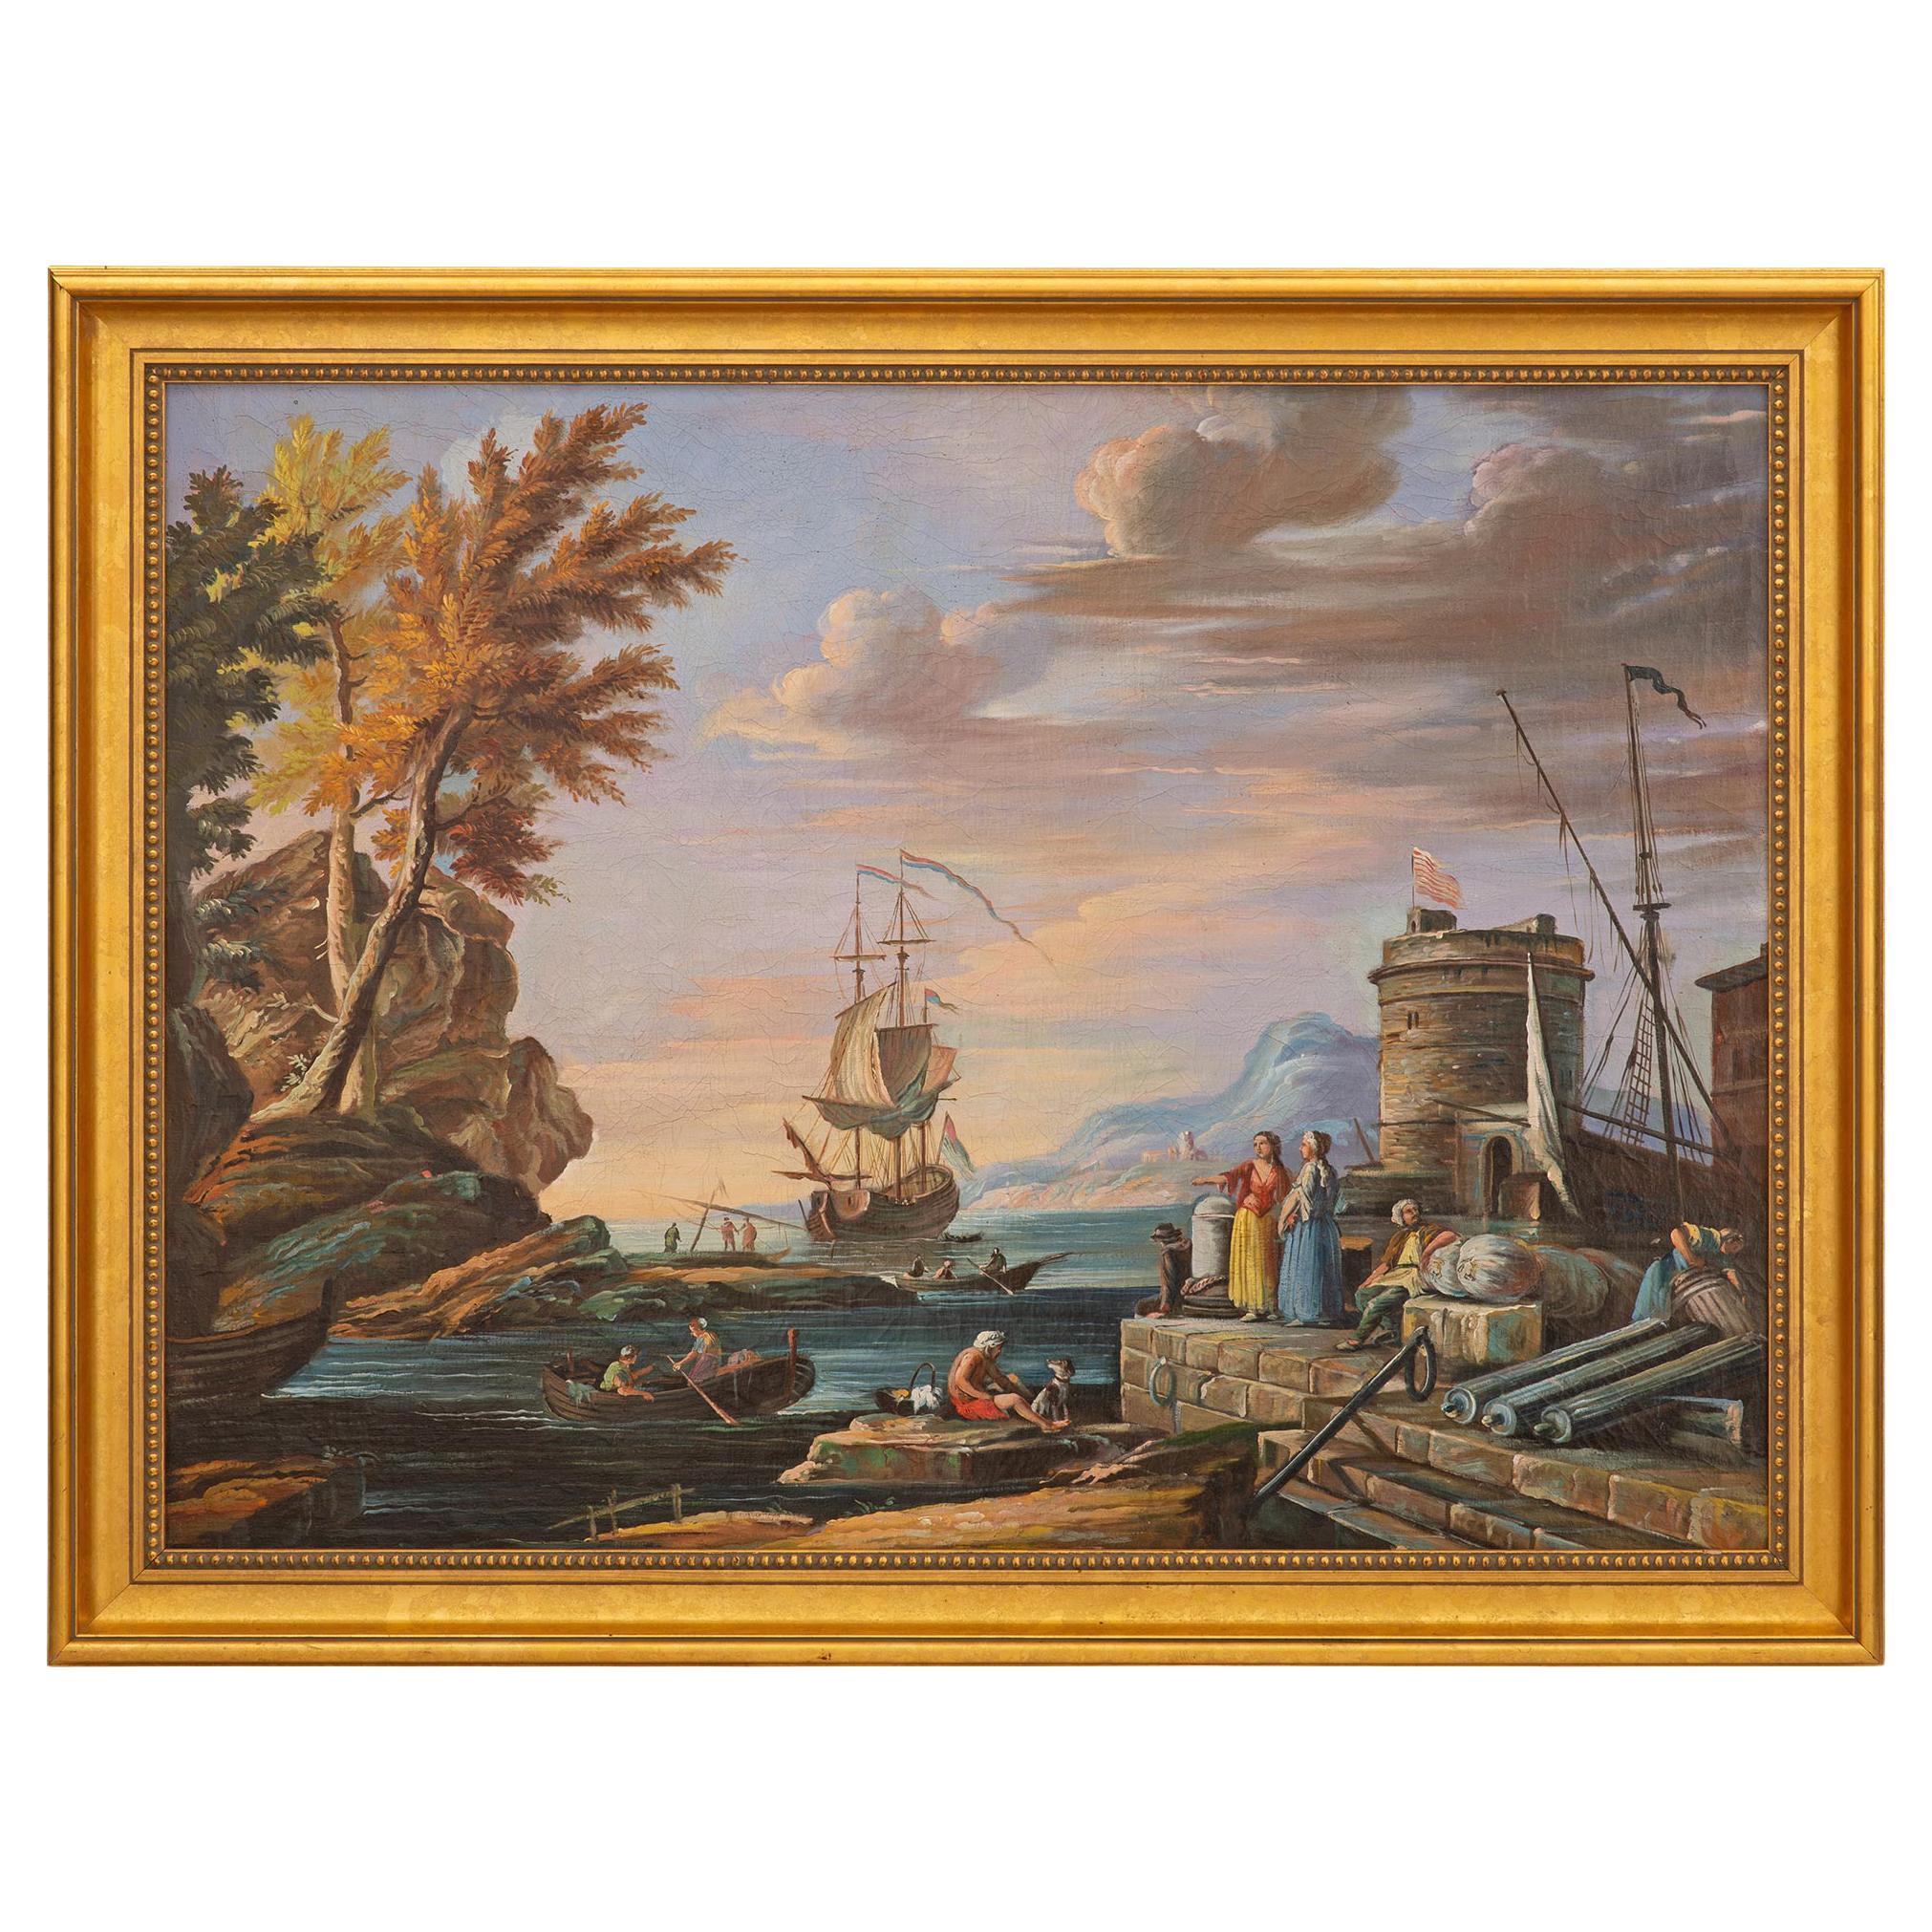 Italian 18th Century Oil on Canvas Painting in a Giltwood Frame